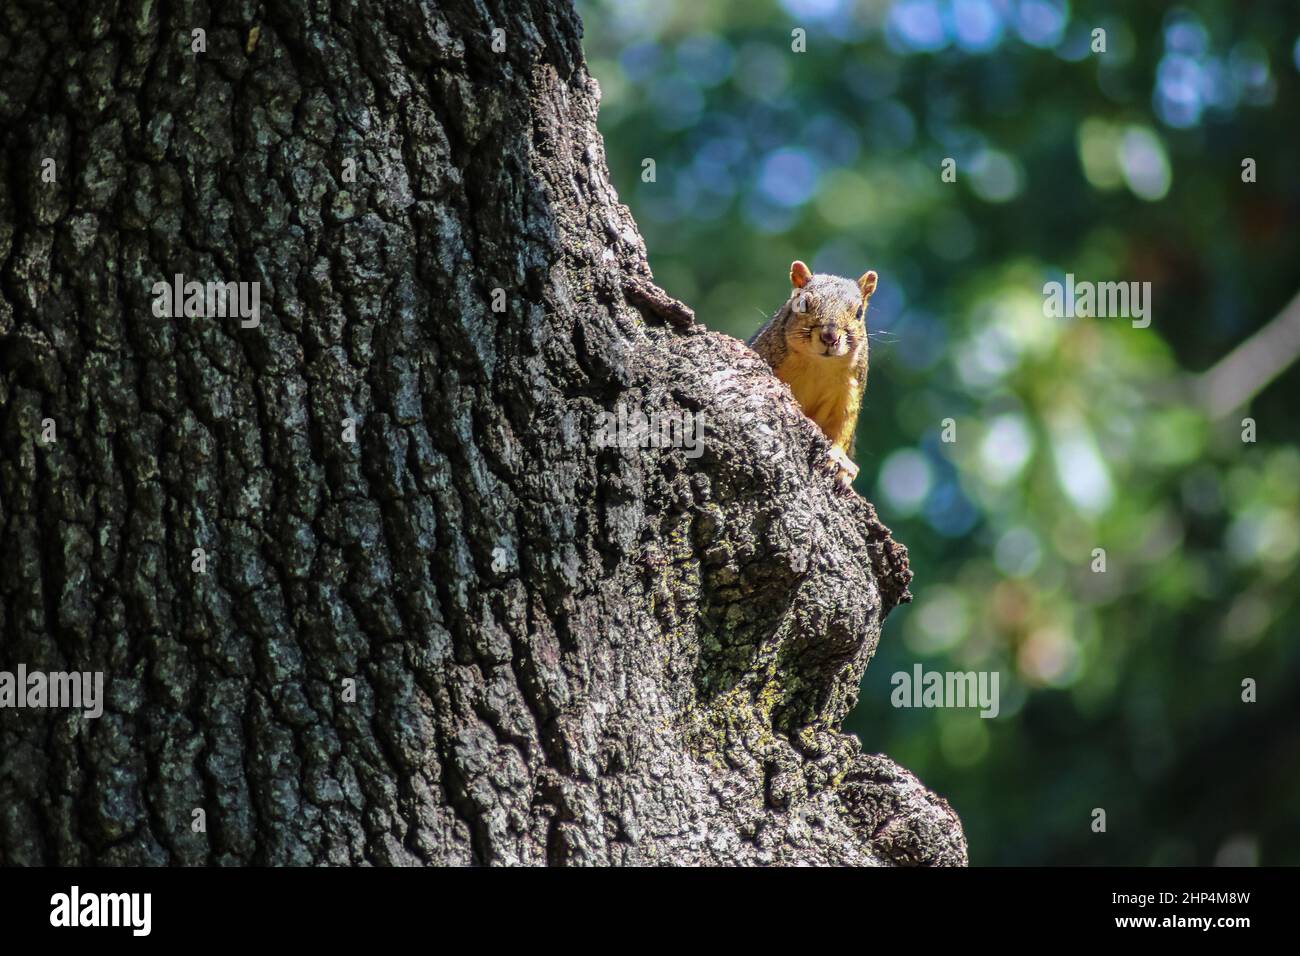 Squirrel peeking around the trunk of a big tree looking at camera with green and blue bokeh behind Stock Photo